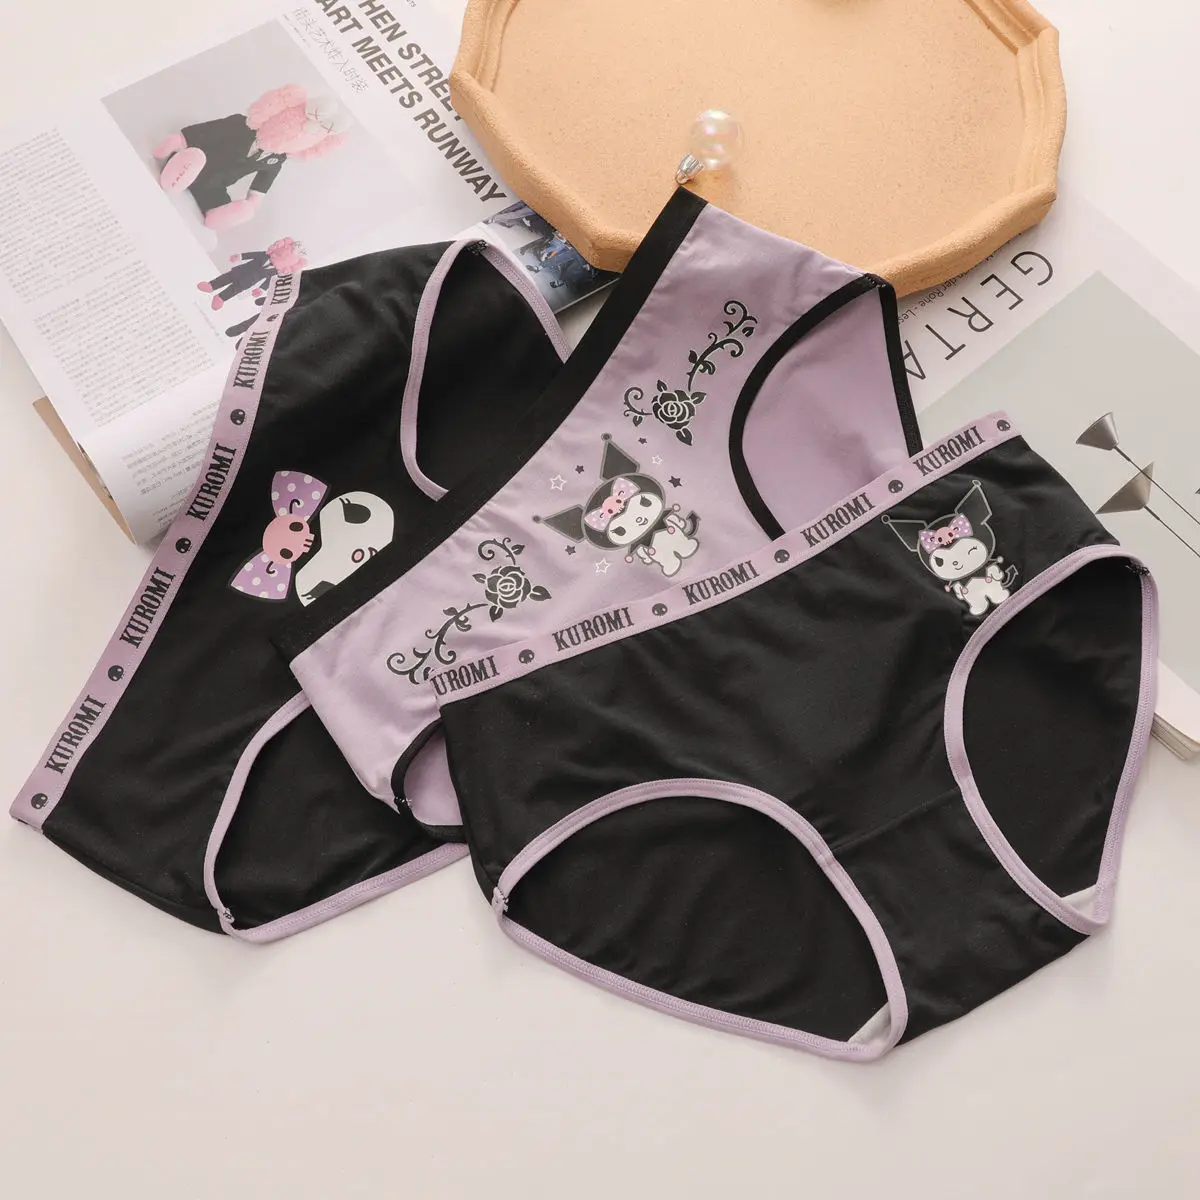 L kuromi underwear cartoon anime underpants students briefs soft breathable girl gifts thumb200